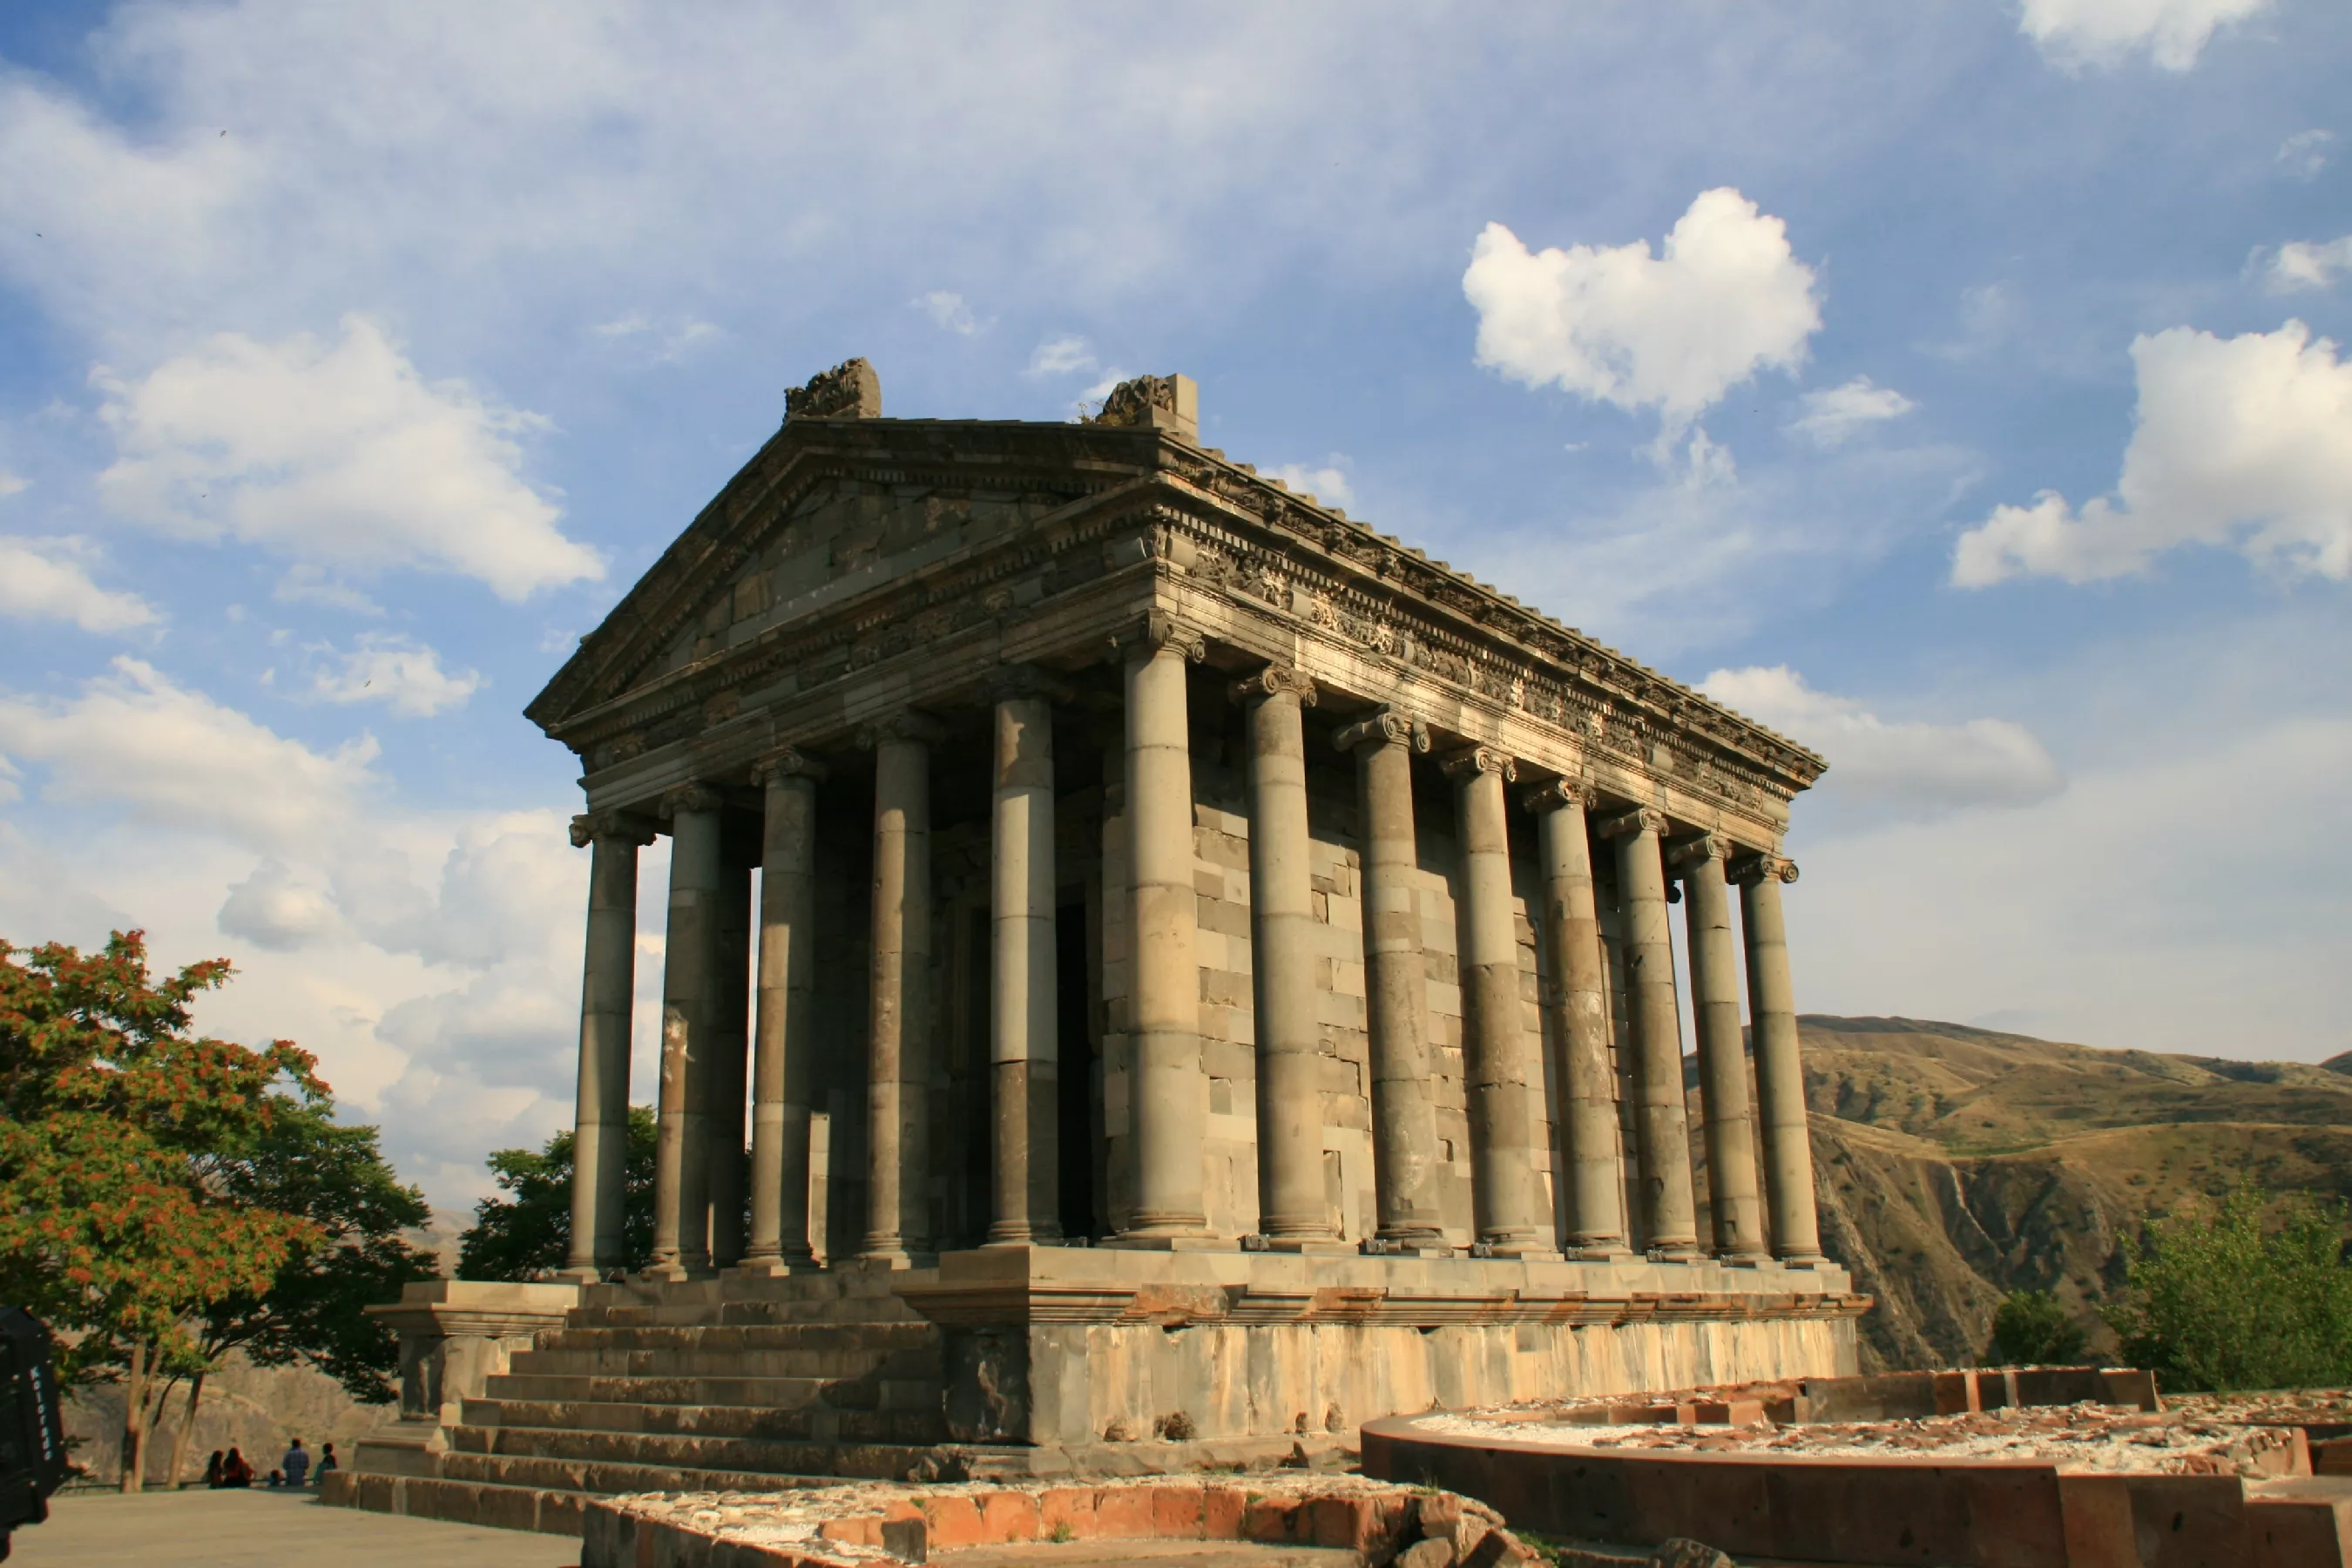 Garni Temple in Armenia, Middle East | Architecture - Rated 3.8